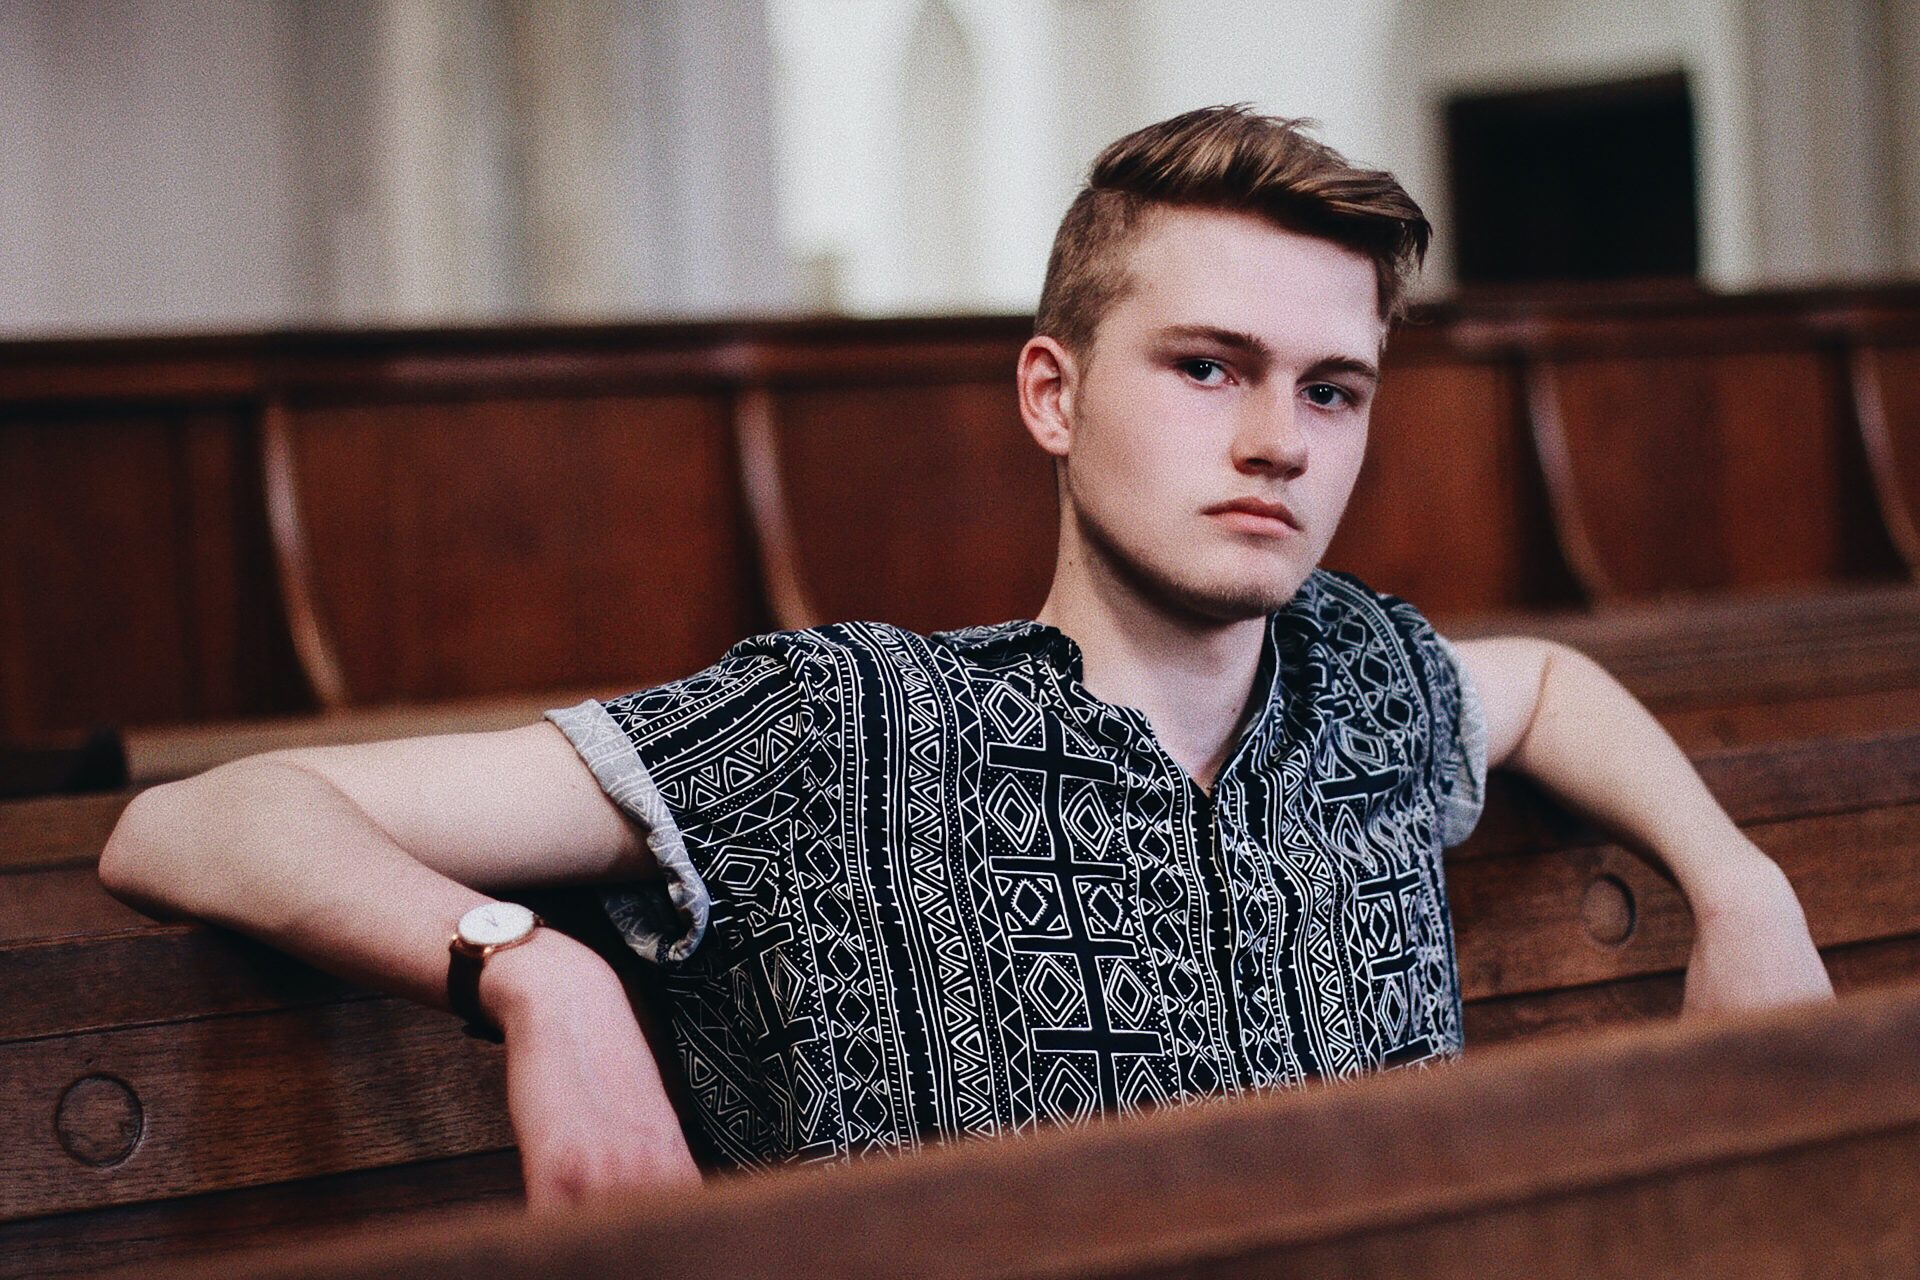 A young man on a church pew with a sour look on his face